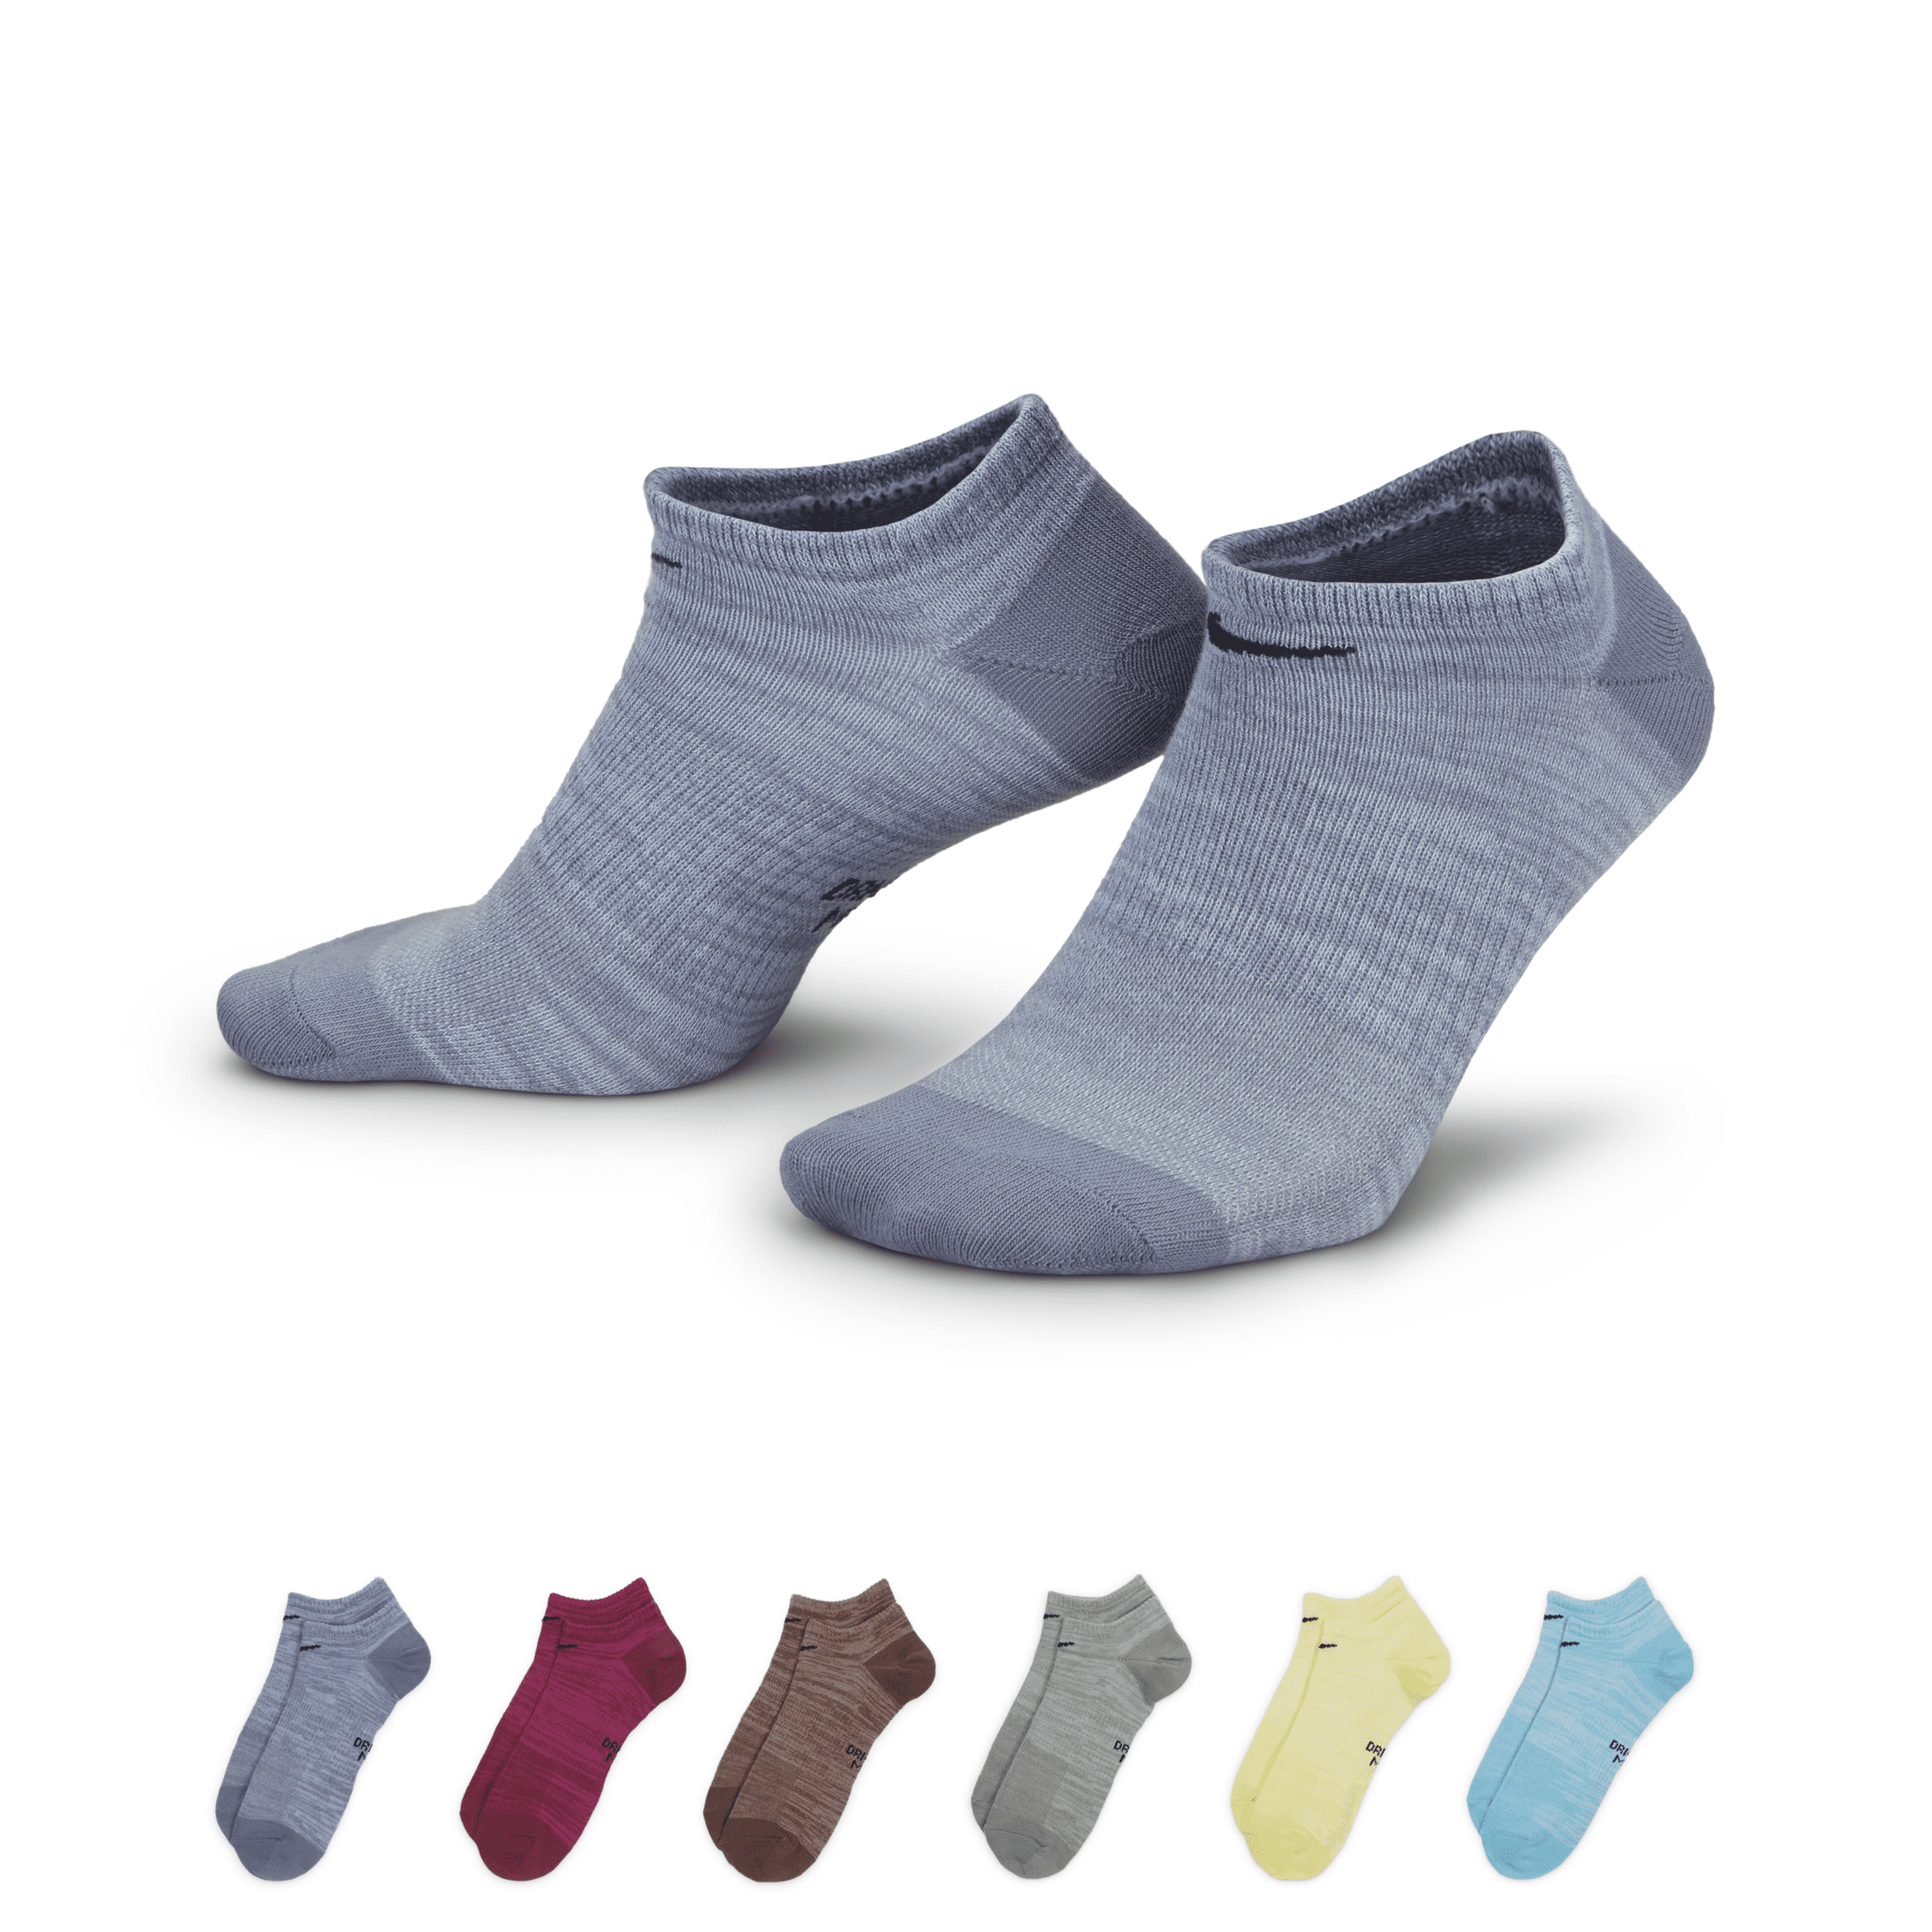 Nike Women's Everyday Lightweight No-show Training Socks (6 Pairs) In Multicolor